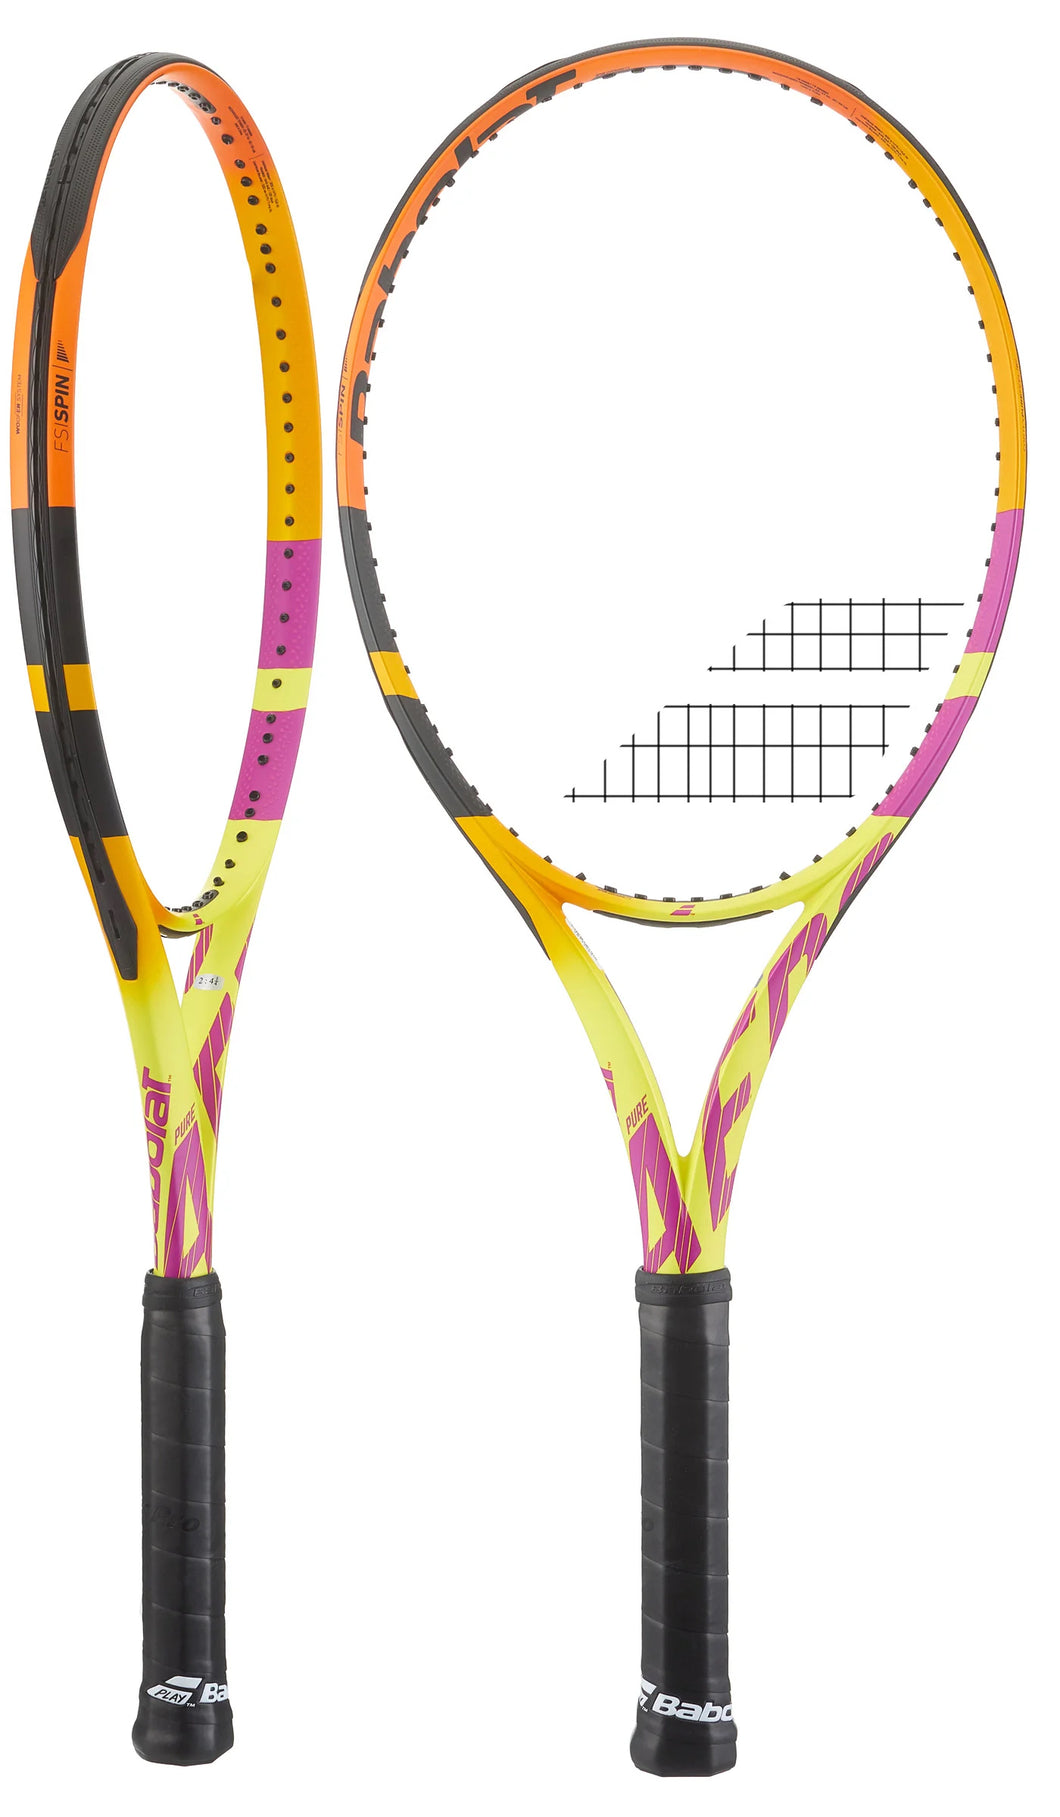 Introducing the Pure Aero Rafa! Endorsed by Rafael Nadal this special cosmetic version of the Pure Aero has the same specs and playability as the standard cosmetic.